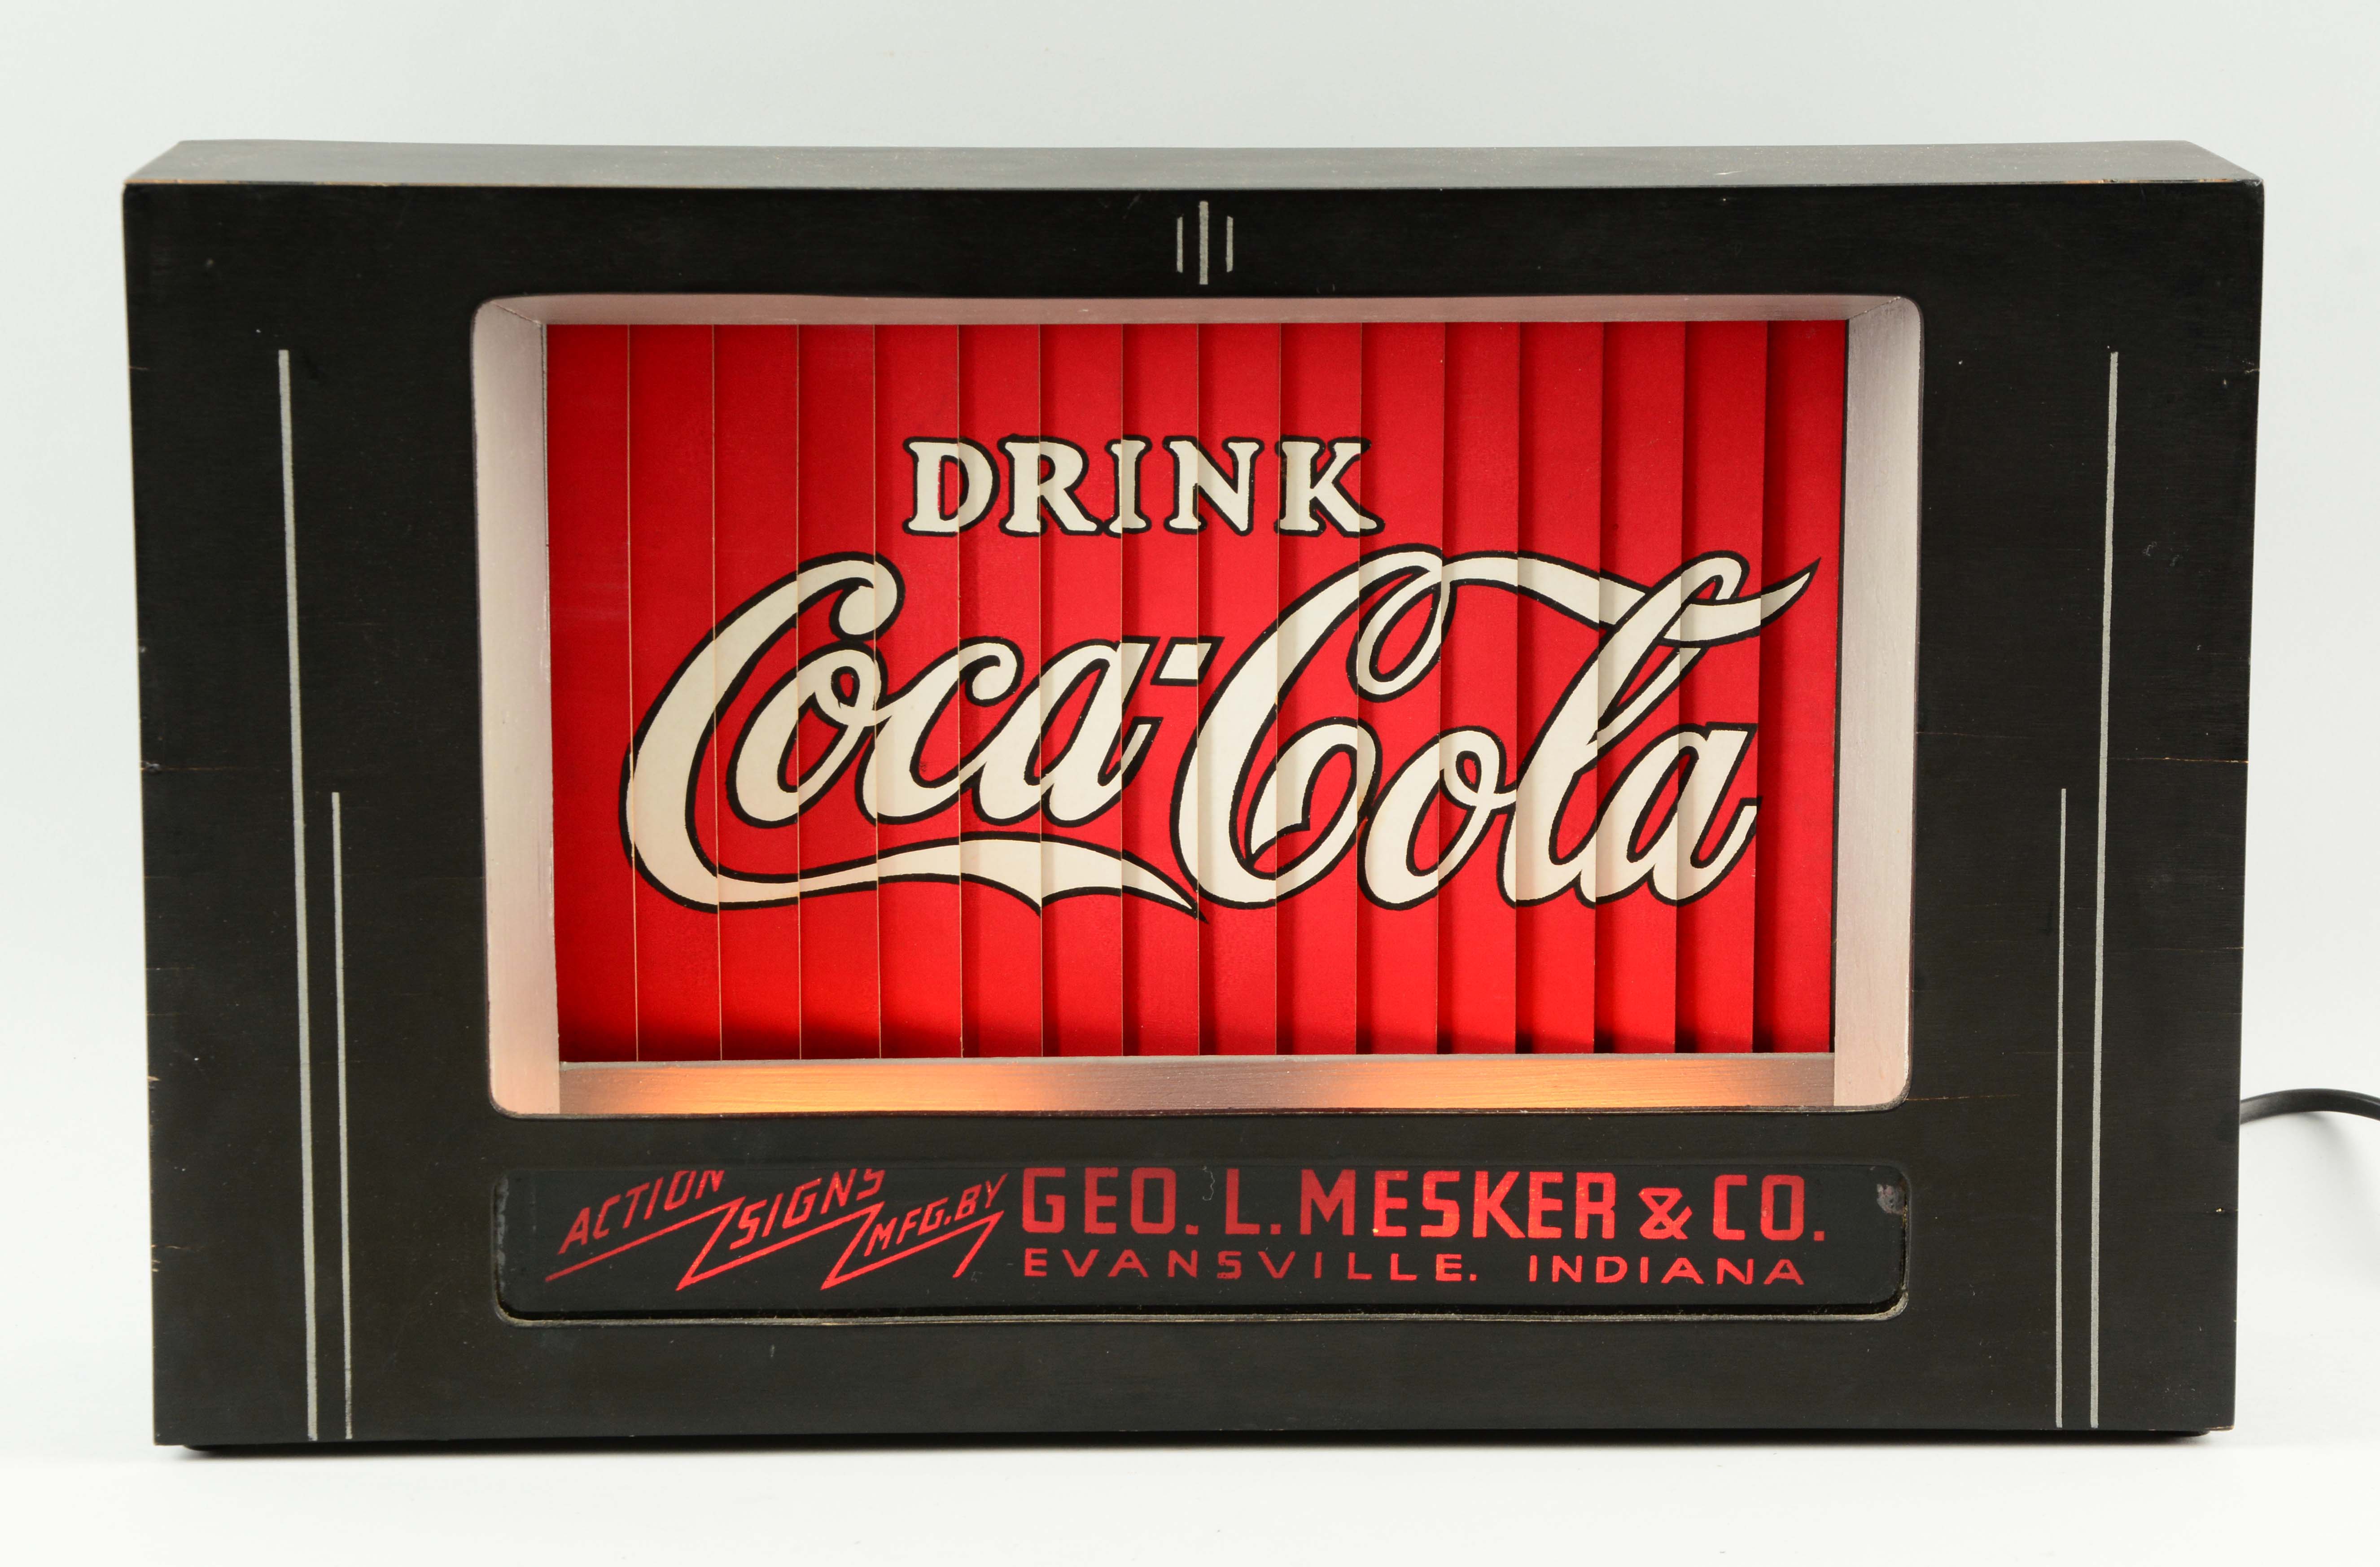 Circa 1930s Coca-Cola Lighted Action Sign, estimated at $6,000-12,000.